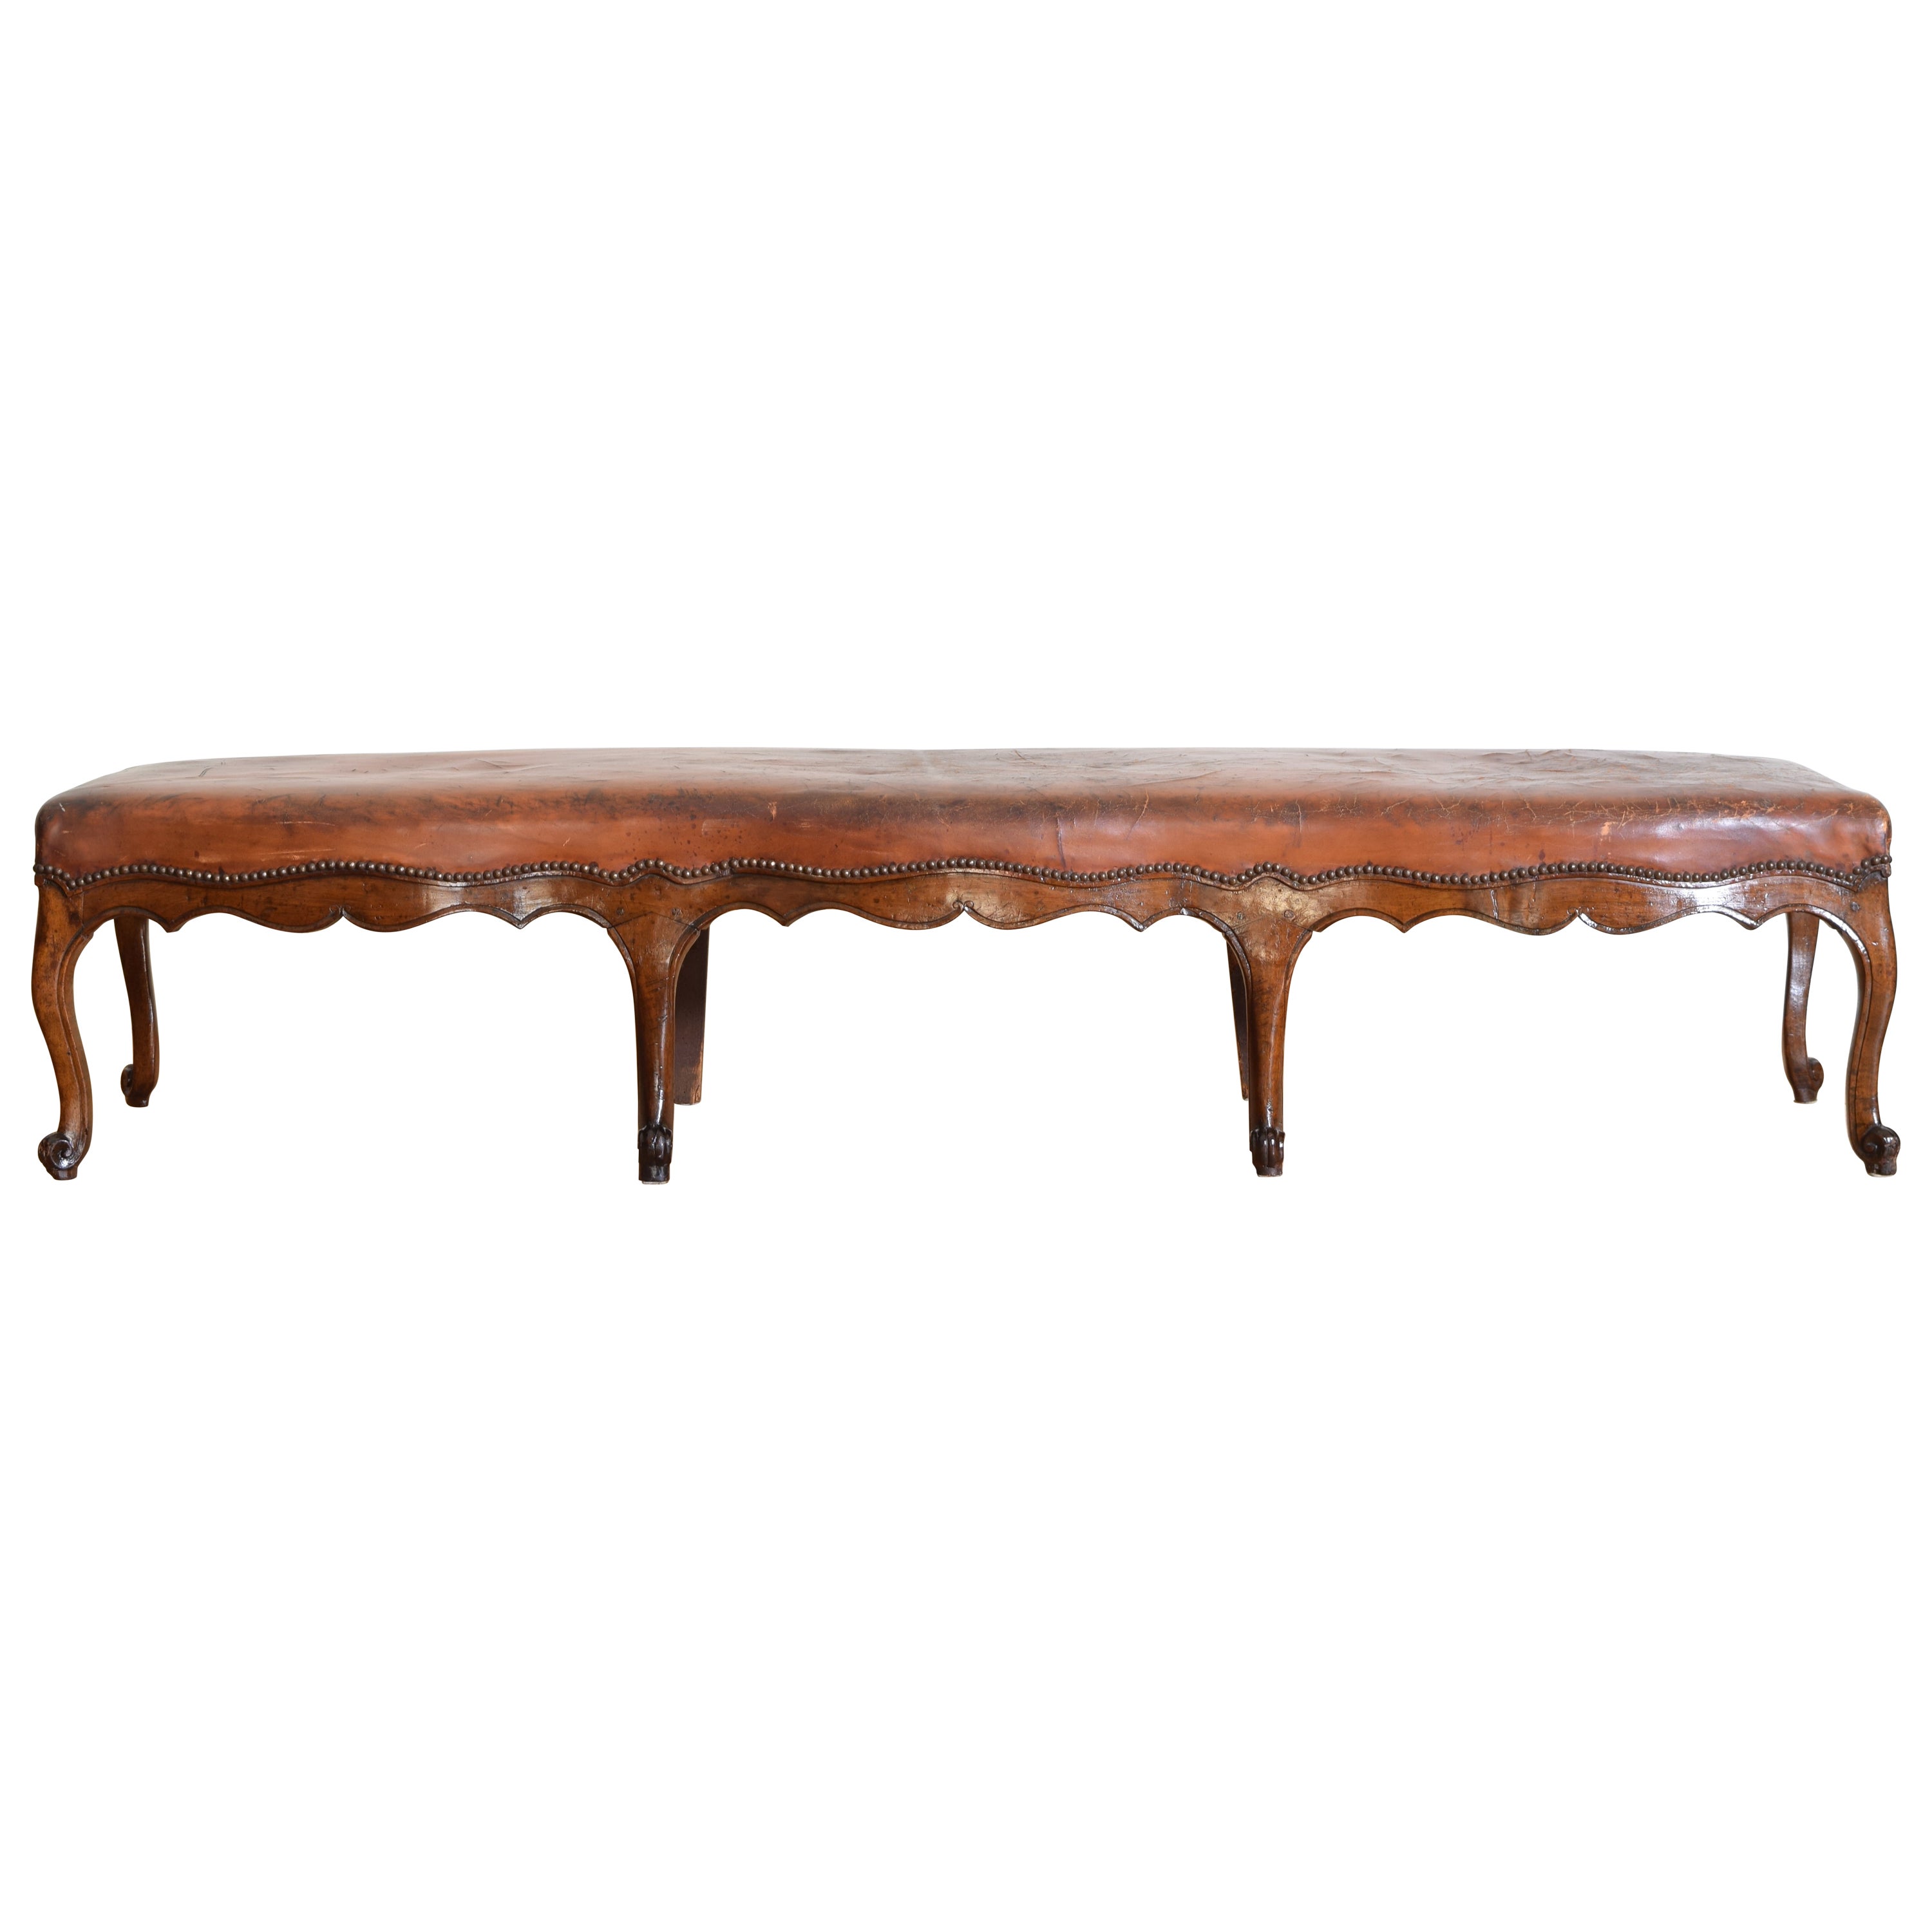 French Louis XV Period Carved Walnut & Leather Upholstered Bench, mid 18th cen.